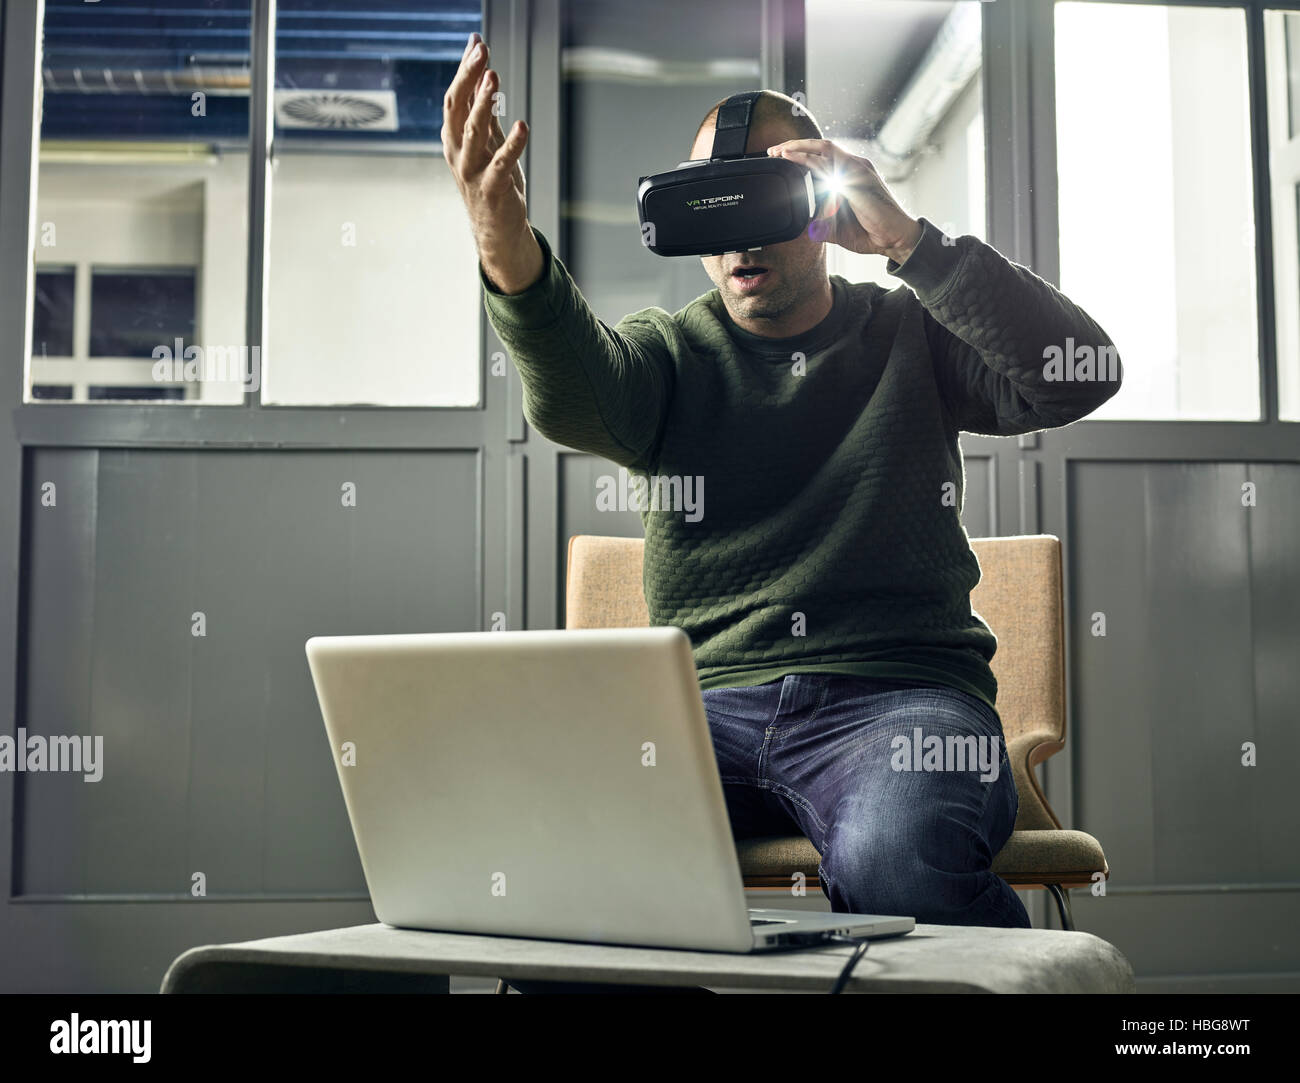 Man with VR goggles, virtual reality glasses Stock Photo